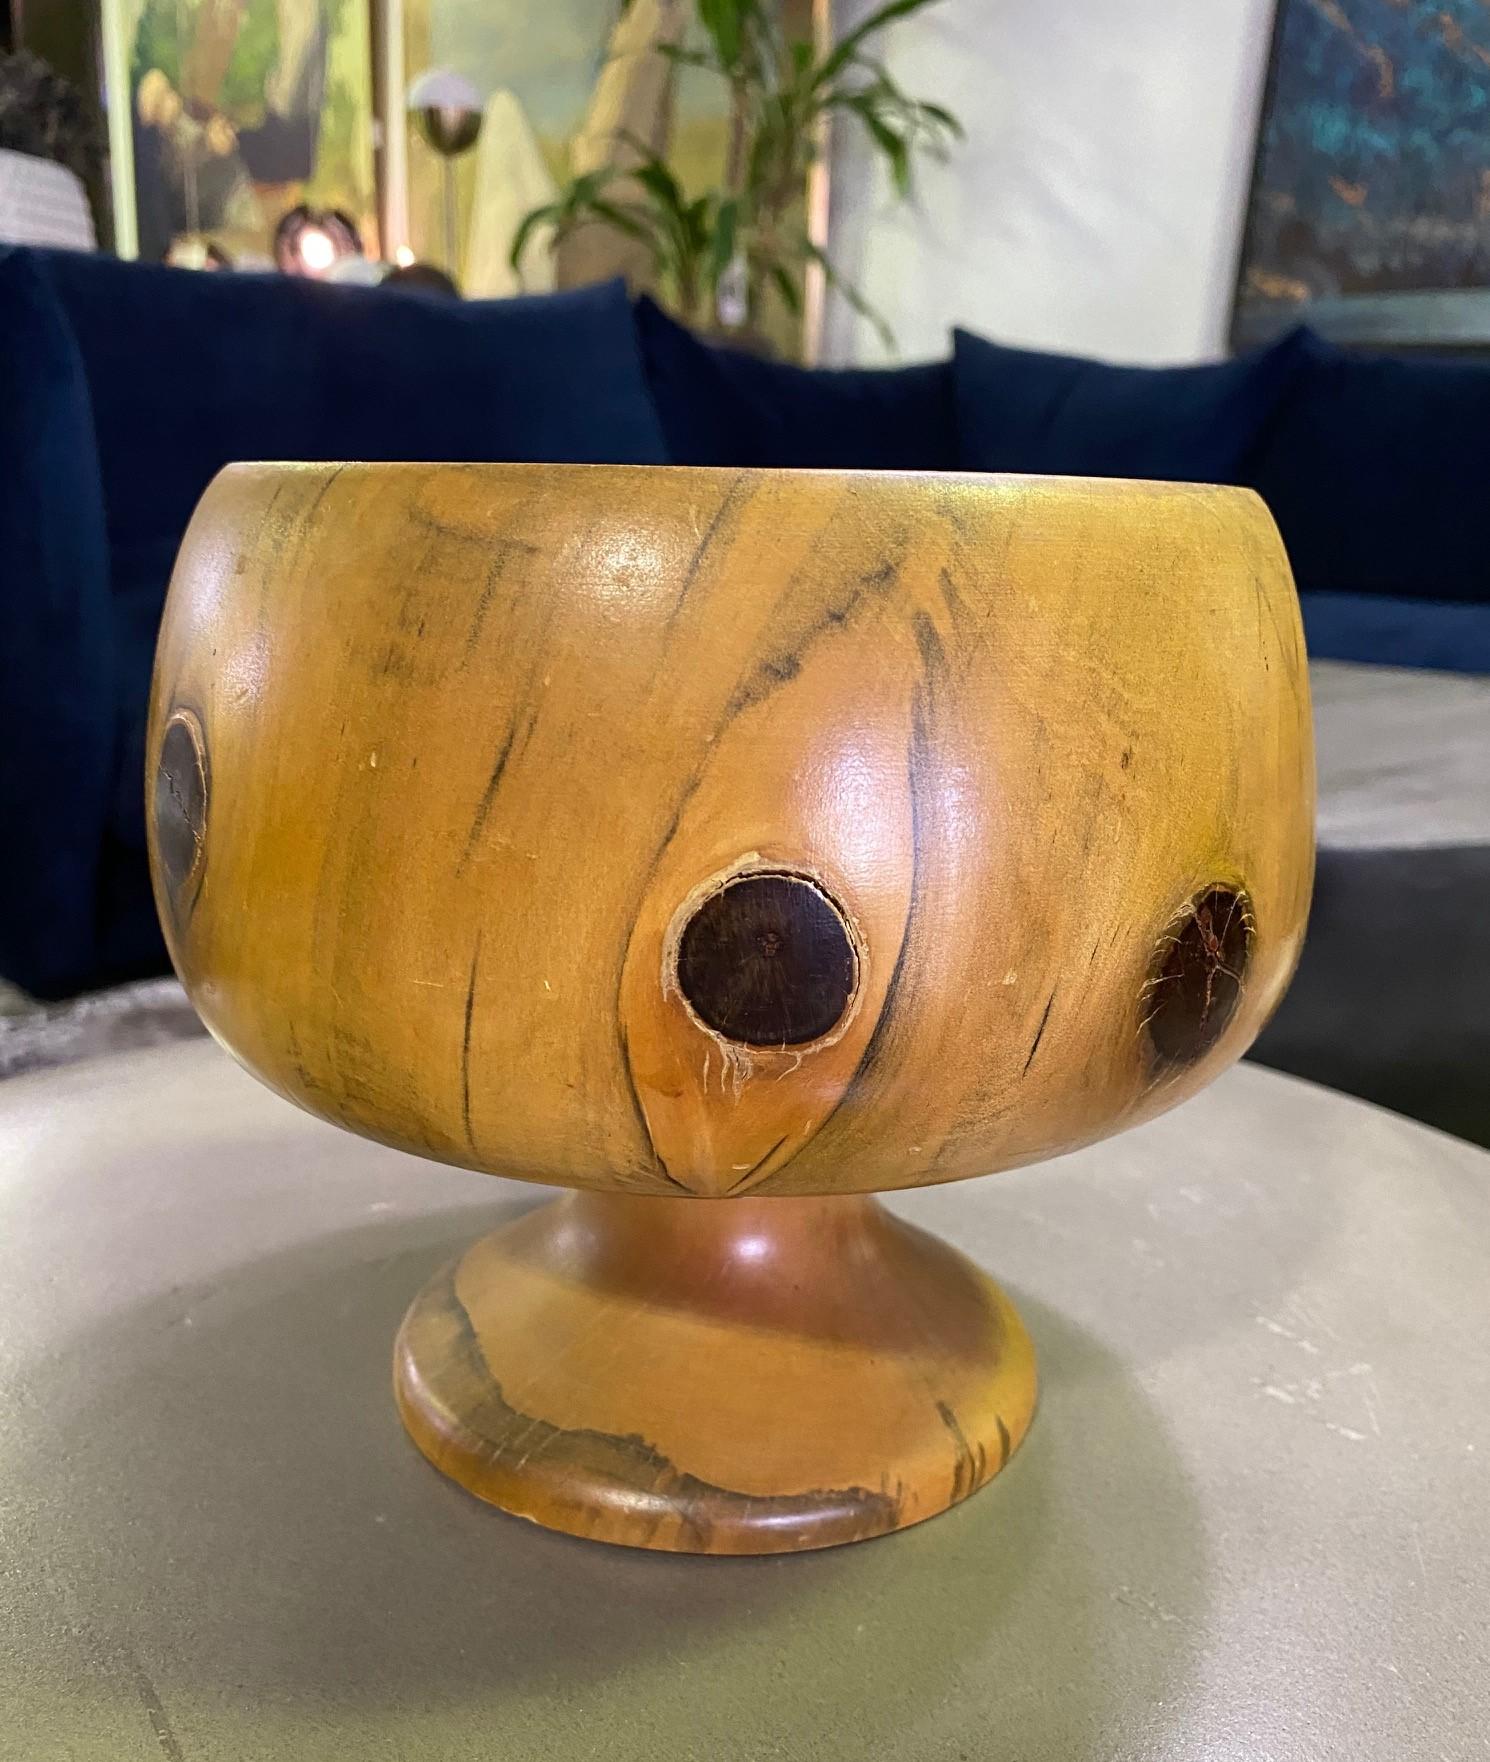 A wonderfully designed and unusually shaped wood-turned vessel / sculpture / chalice. Very well crafted. 

Noted: 